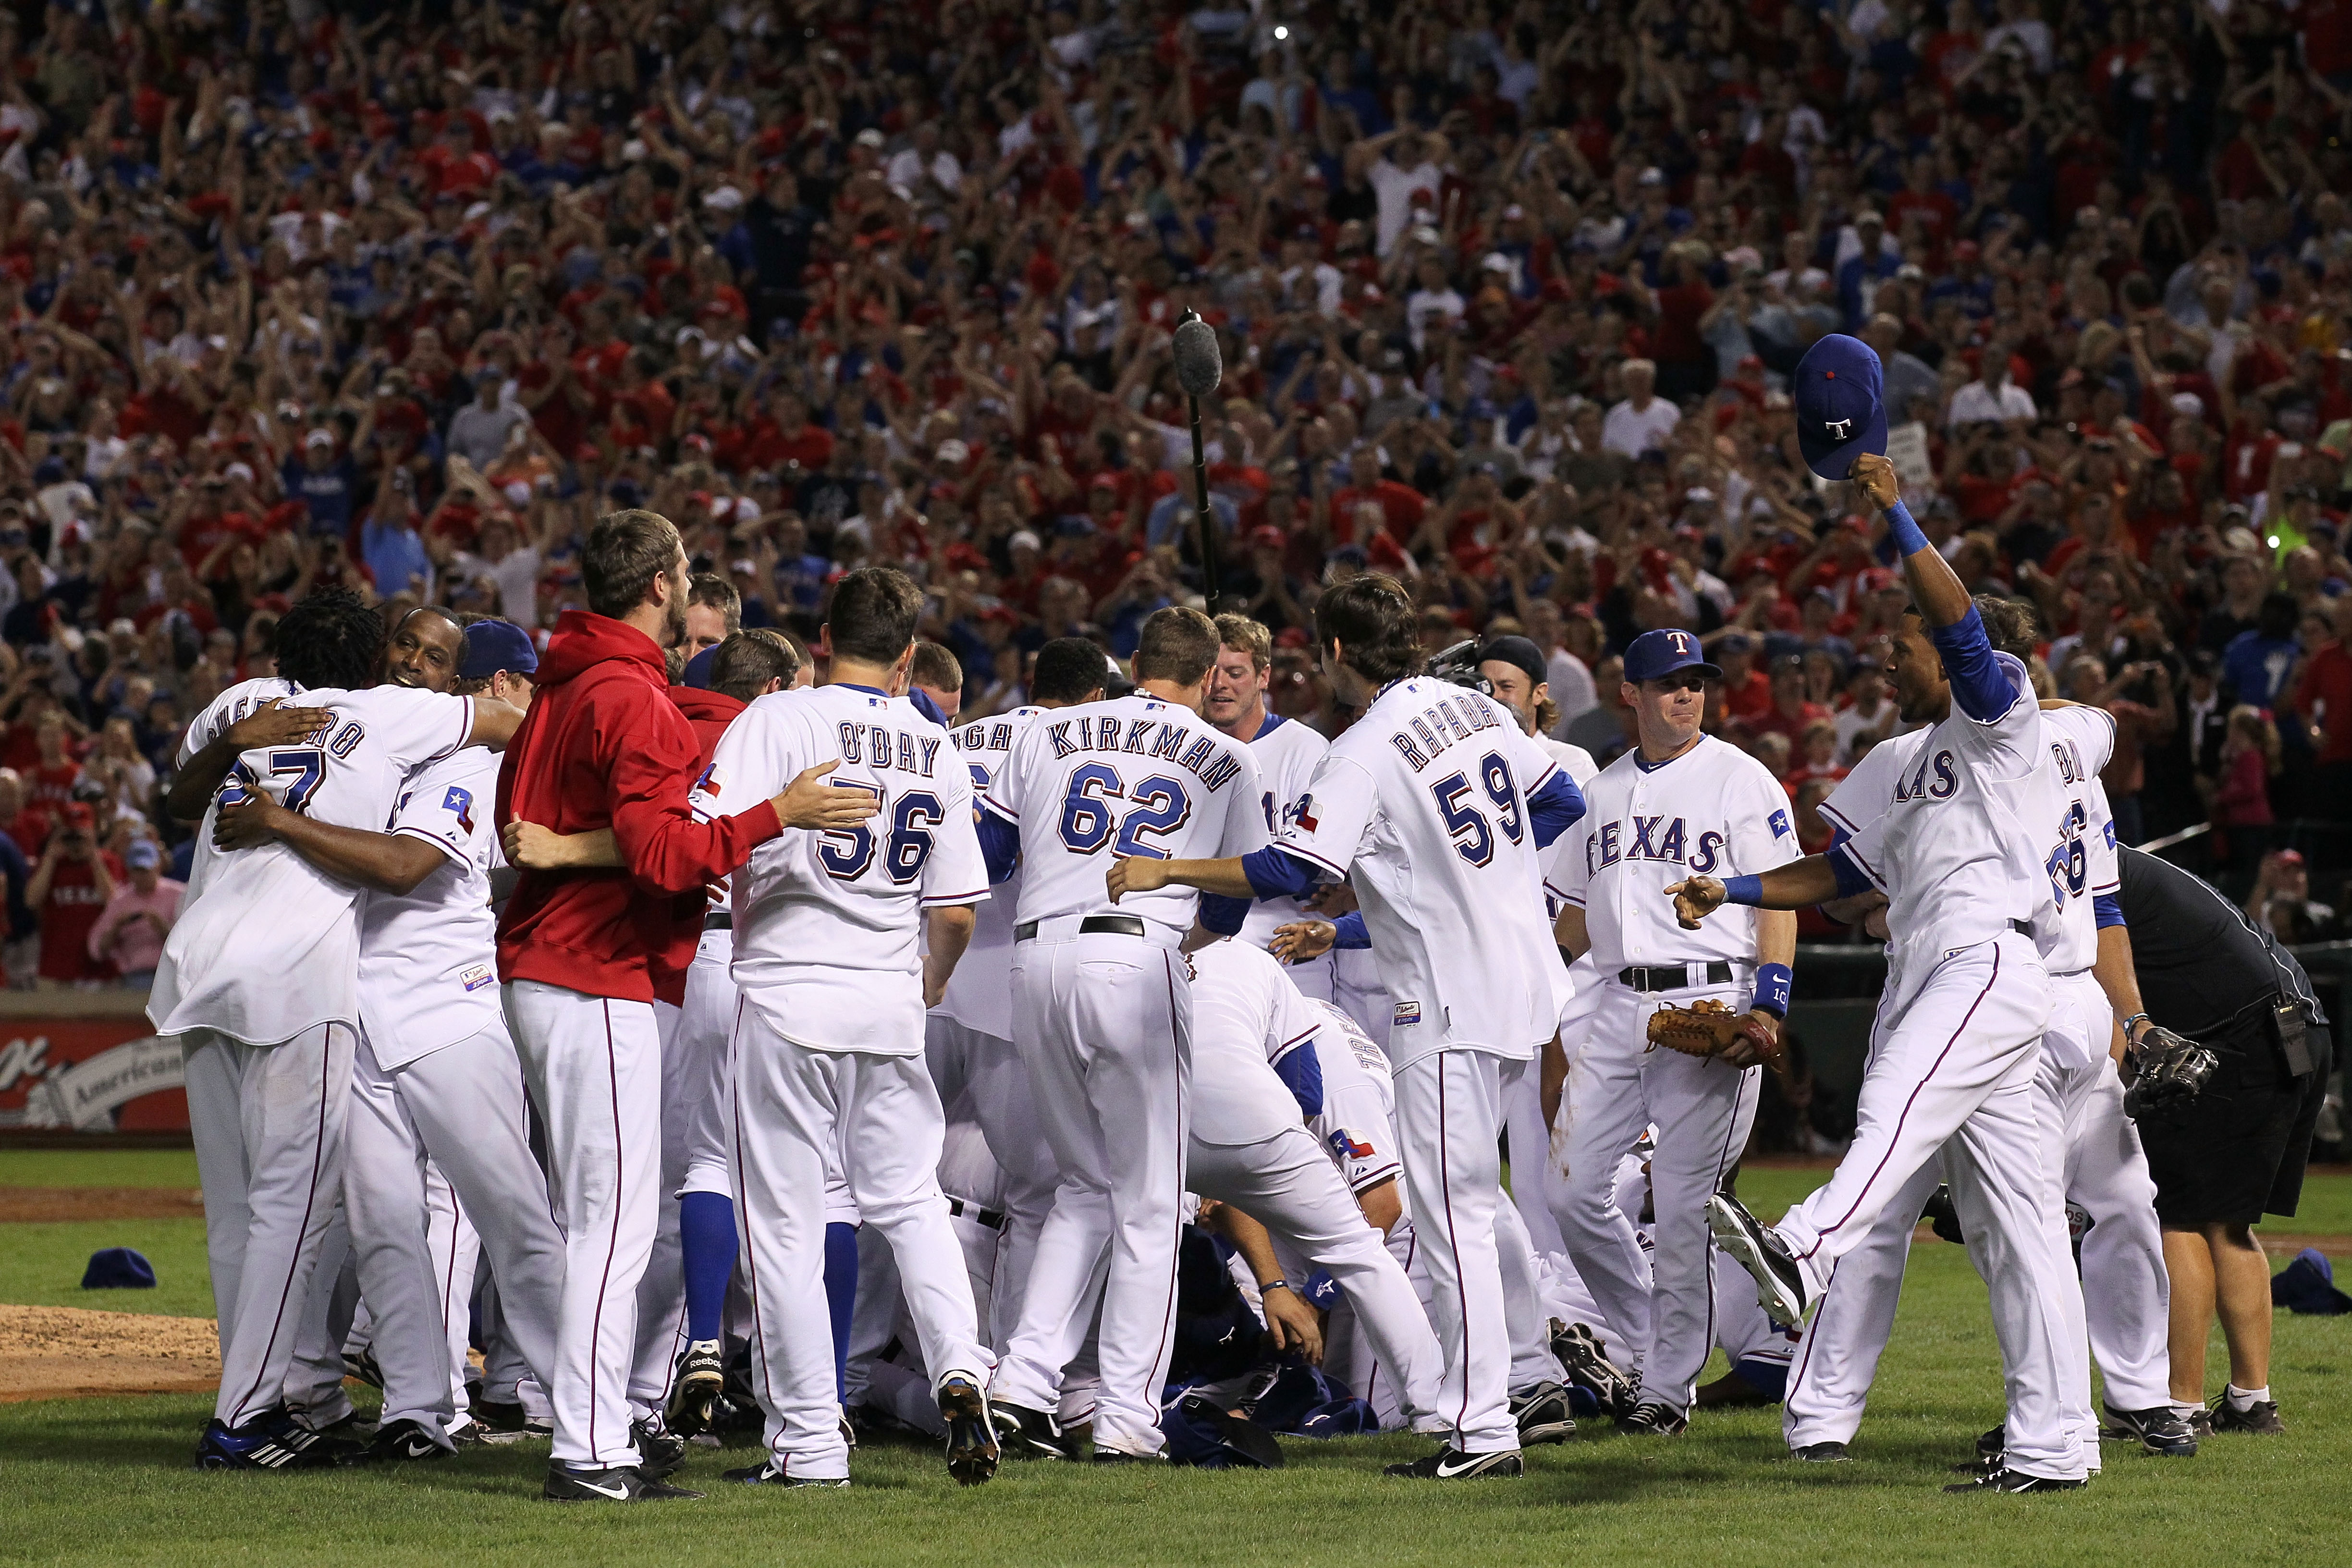 ARLINGTON, TX - OCTOBER 22:  The Texas Rangers celebrate on the field after defeating the New York Yankees 6-1 in Game Six of the ALCS to advance to the World Series during the 2010 MLB Playoffs at Rangers Ballpark in Arlington on October 22, 2010 in Arli